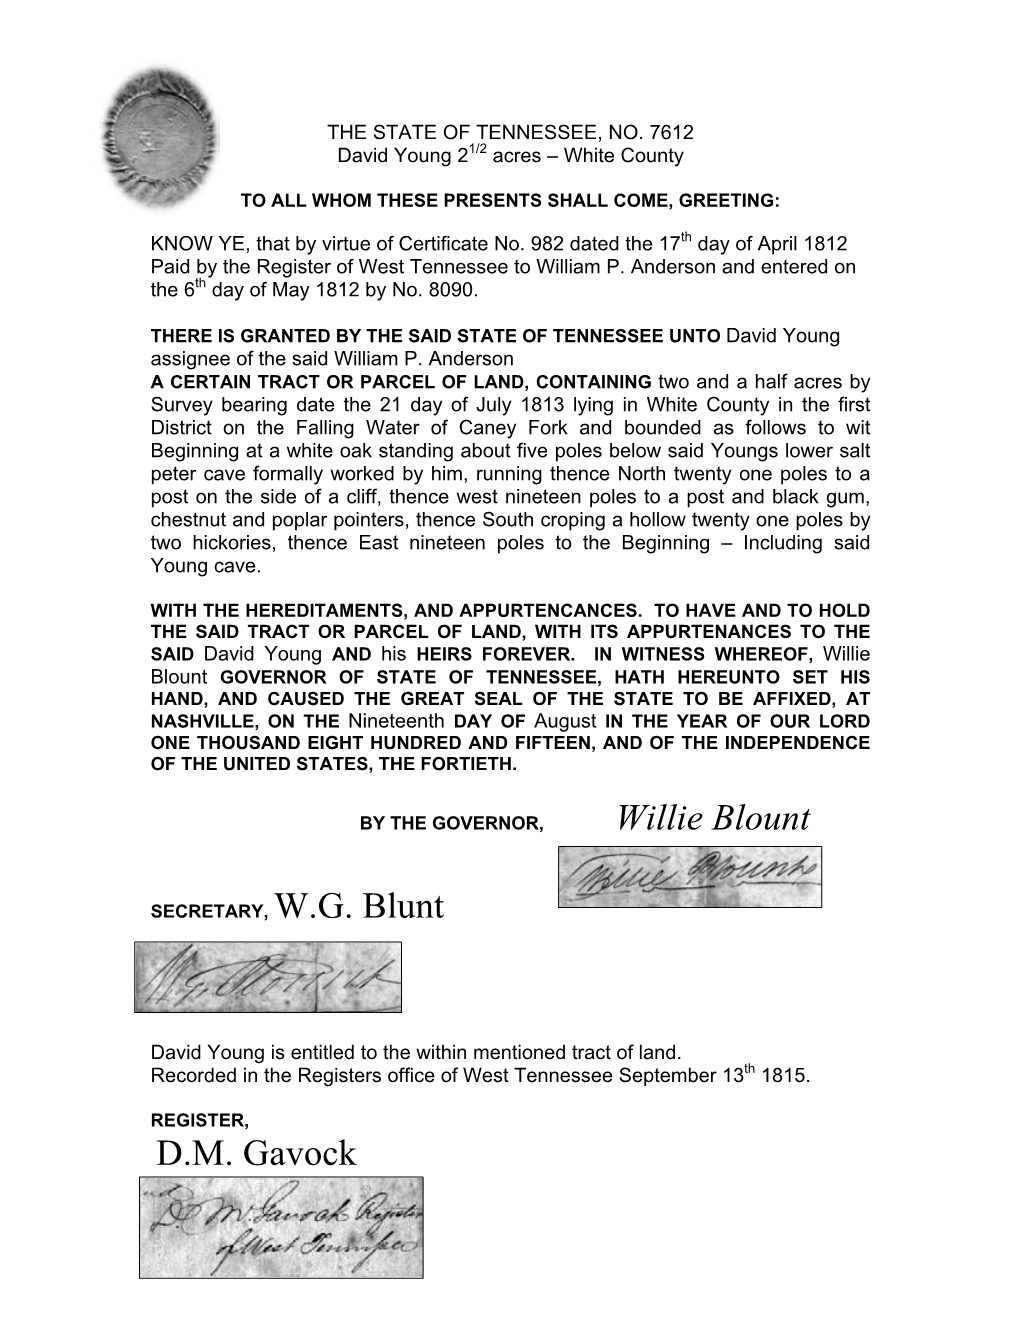 GRANTED by the SAID STATE of TENNESSEE UNTO David Young Assignee of the Said William P